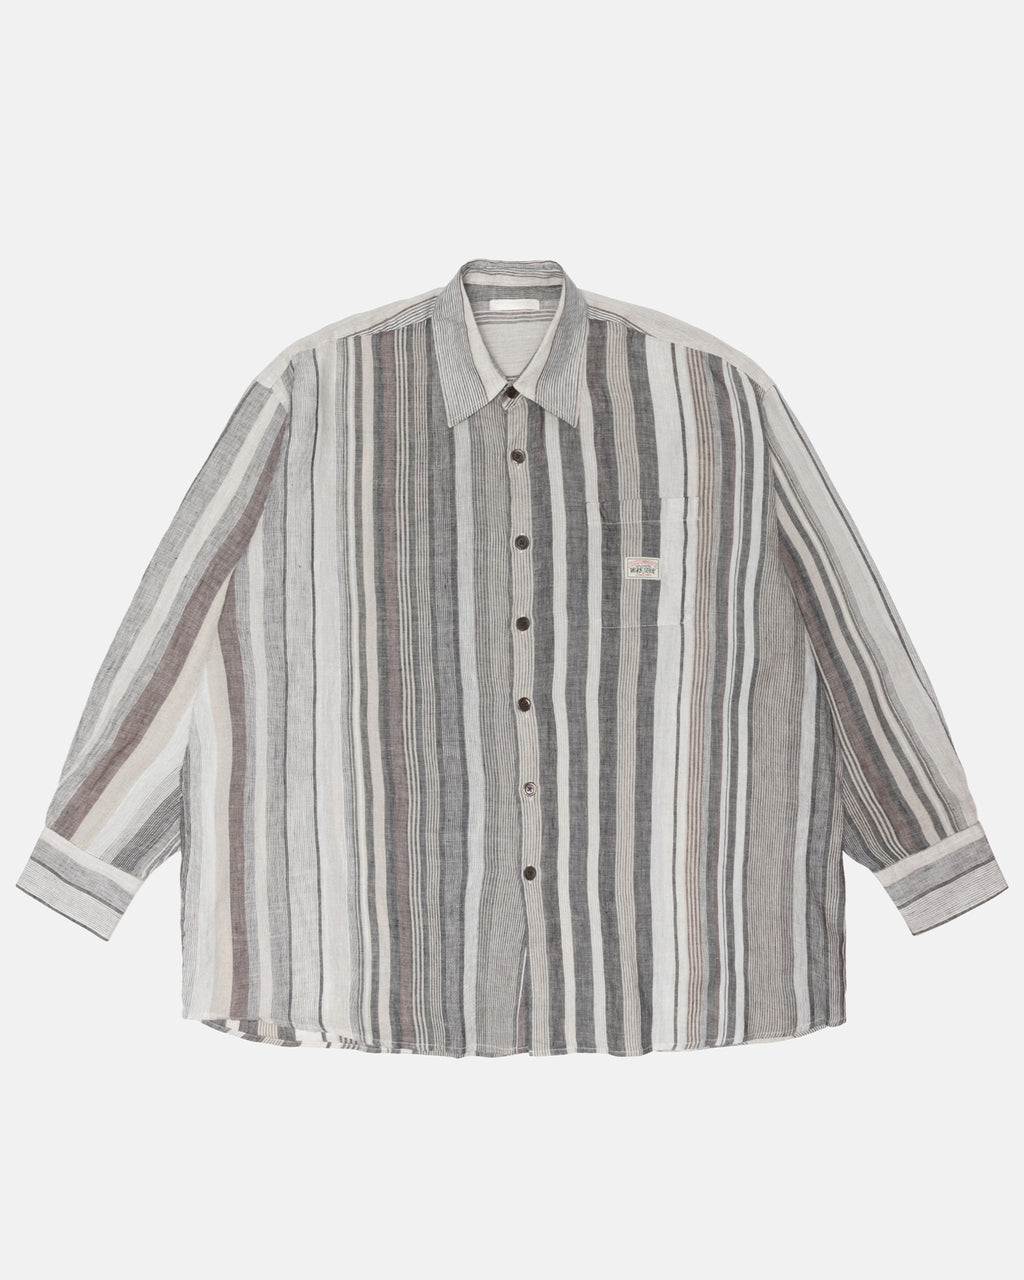 Buy Stussy Tops & Shirts Online At Best Prices In UAE - Raw Linen